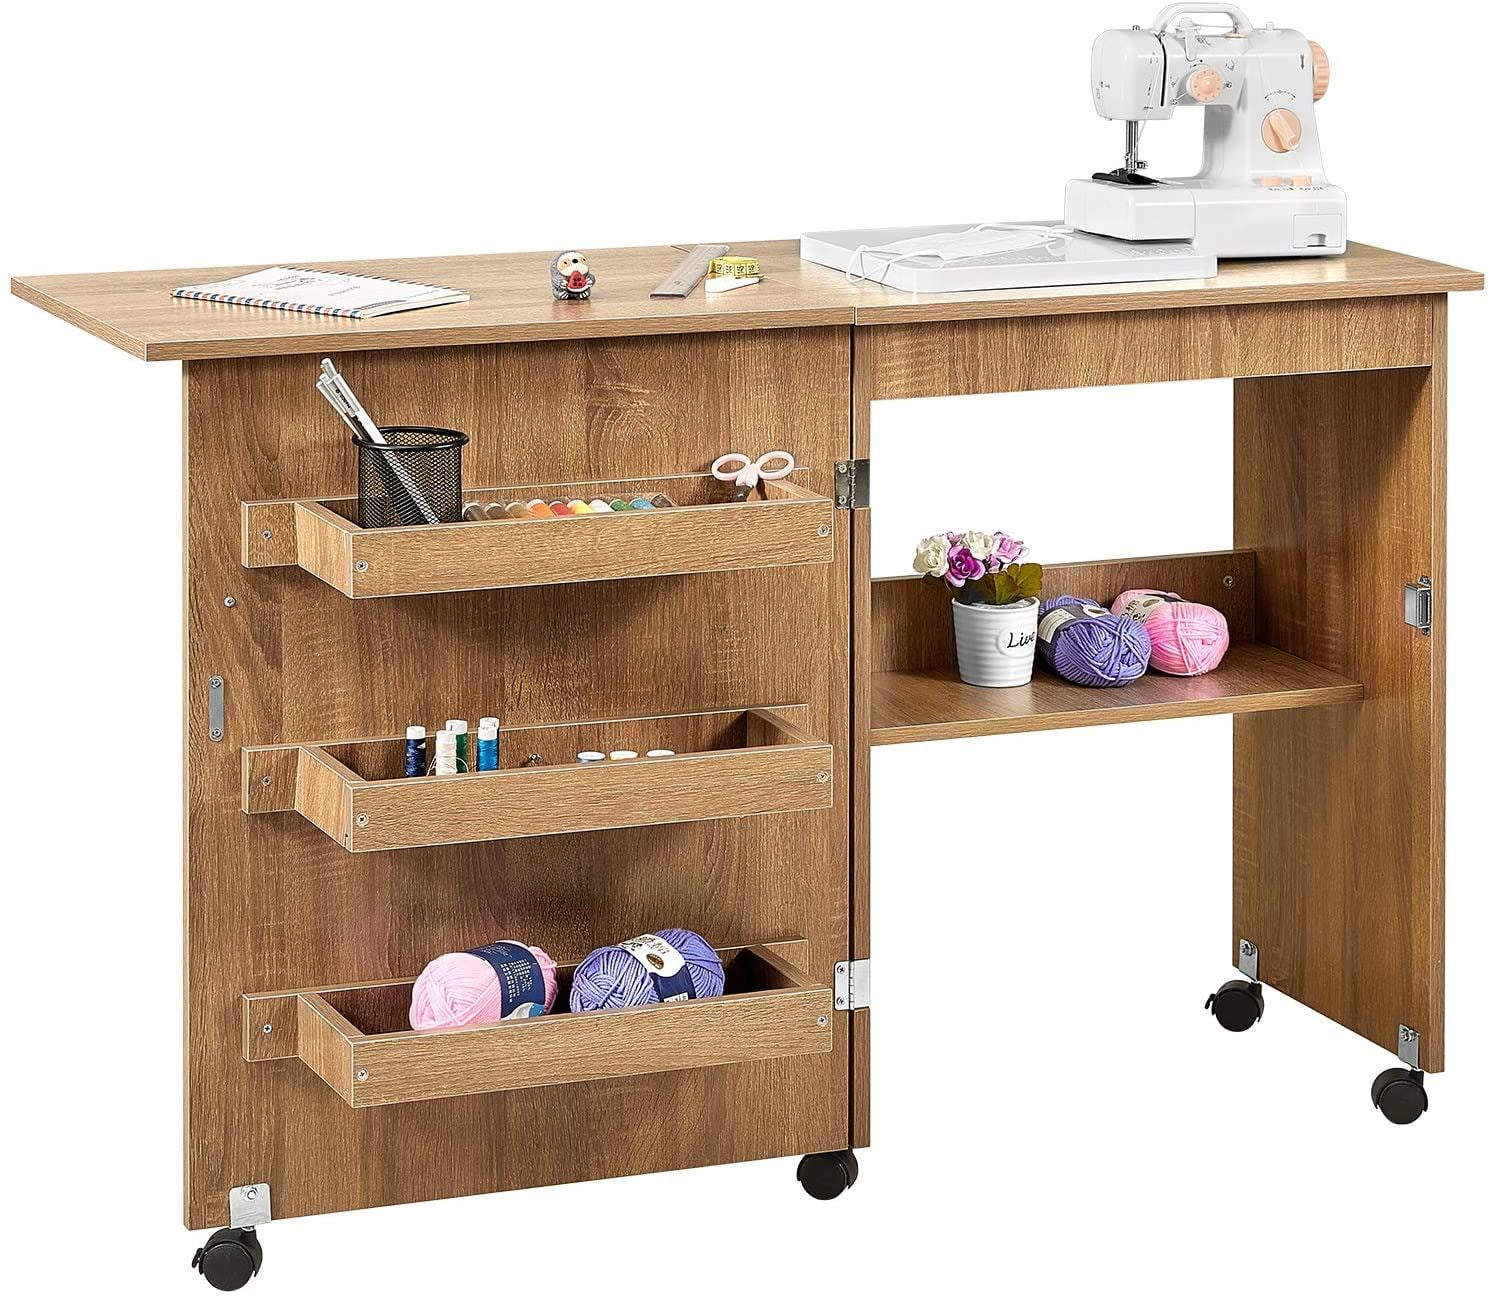 Cinnamon Cherry Sewing Cabinet Furniture/Craft Center Folding Table with Sew-Kit Bundle